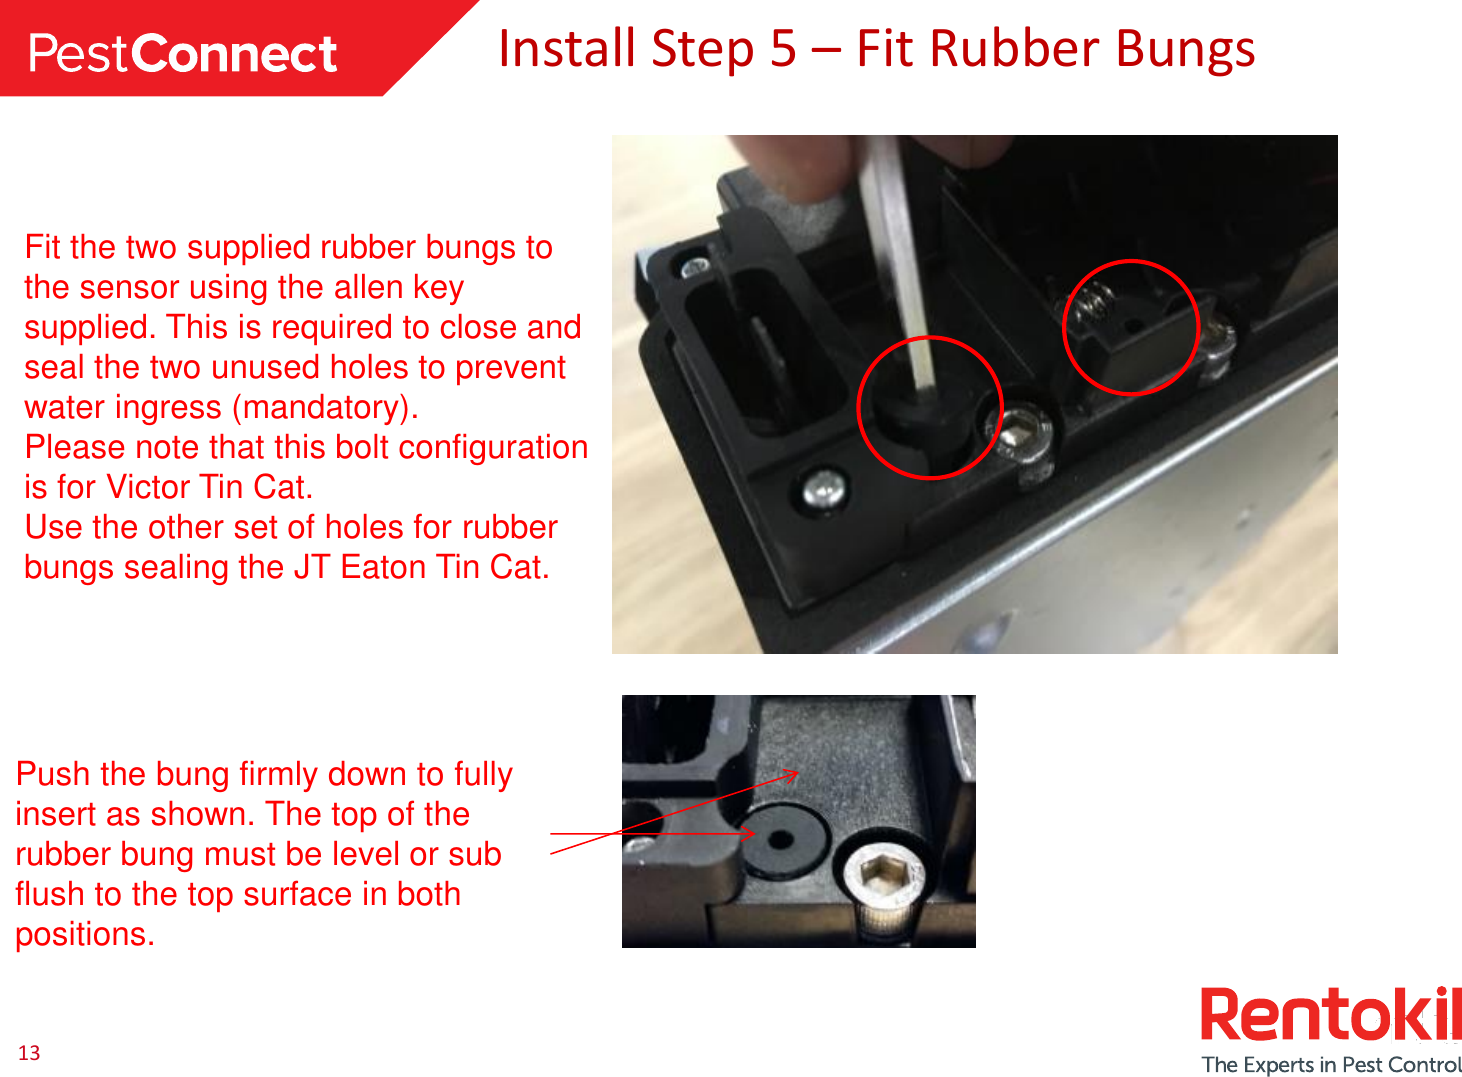 13 Install Step 5 – Fit Rubber Bungs Fit the two supplied rubber bungs to the sensor using the allen key supplied. This is required to close and seal the two unused holes to prevent water ingress (mandatory). Please note that this bolt configuration is for Victor Tin Cat. Use the other set of holes for rubber bungs sealing the JT Eaton Tin Cat.  Push the bung firmly down to fully insert as shown. The top of the rubber bung must be level or sub flush to the top surface in both positions. 